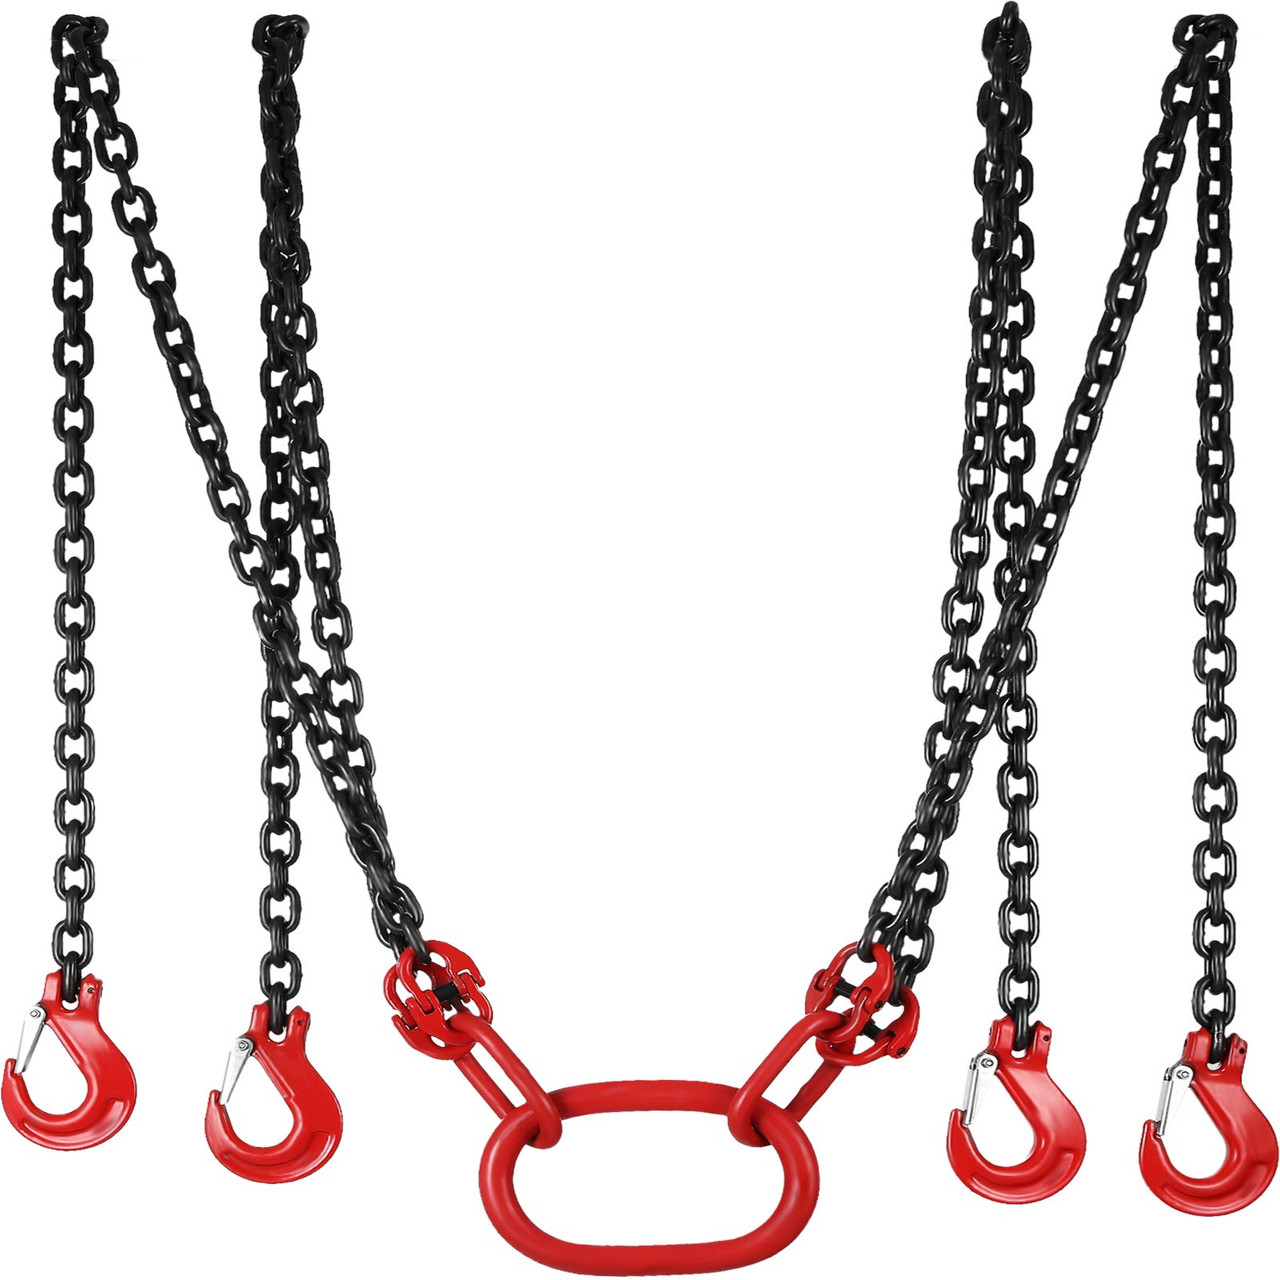 13FT Chain Sling 5/16 Inch X 13 FT Engine Lift Chain G80 Alloy Steel Engine Chain Hoist Lifts 5 Ton with 4 Leg Grab Hooks Used in Mining, Machinery, Ports, Building